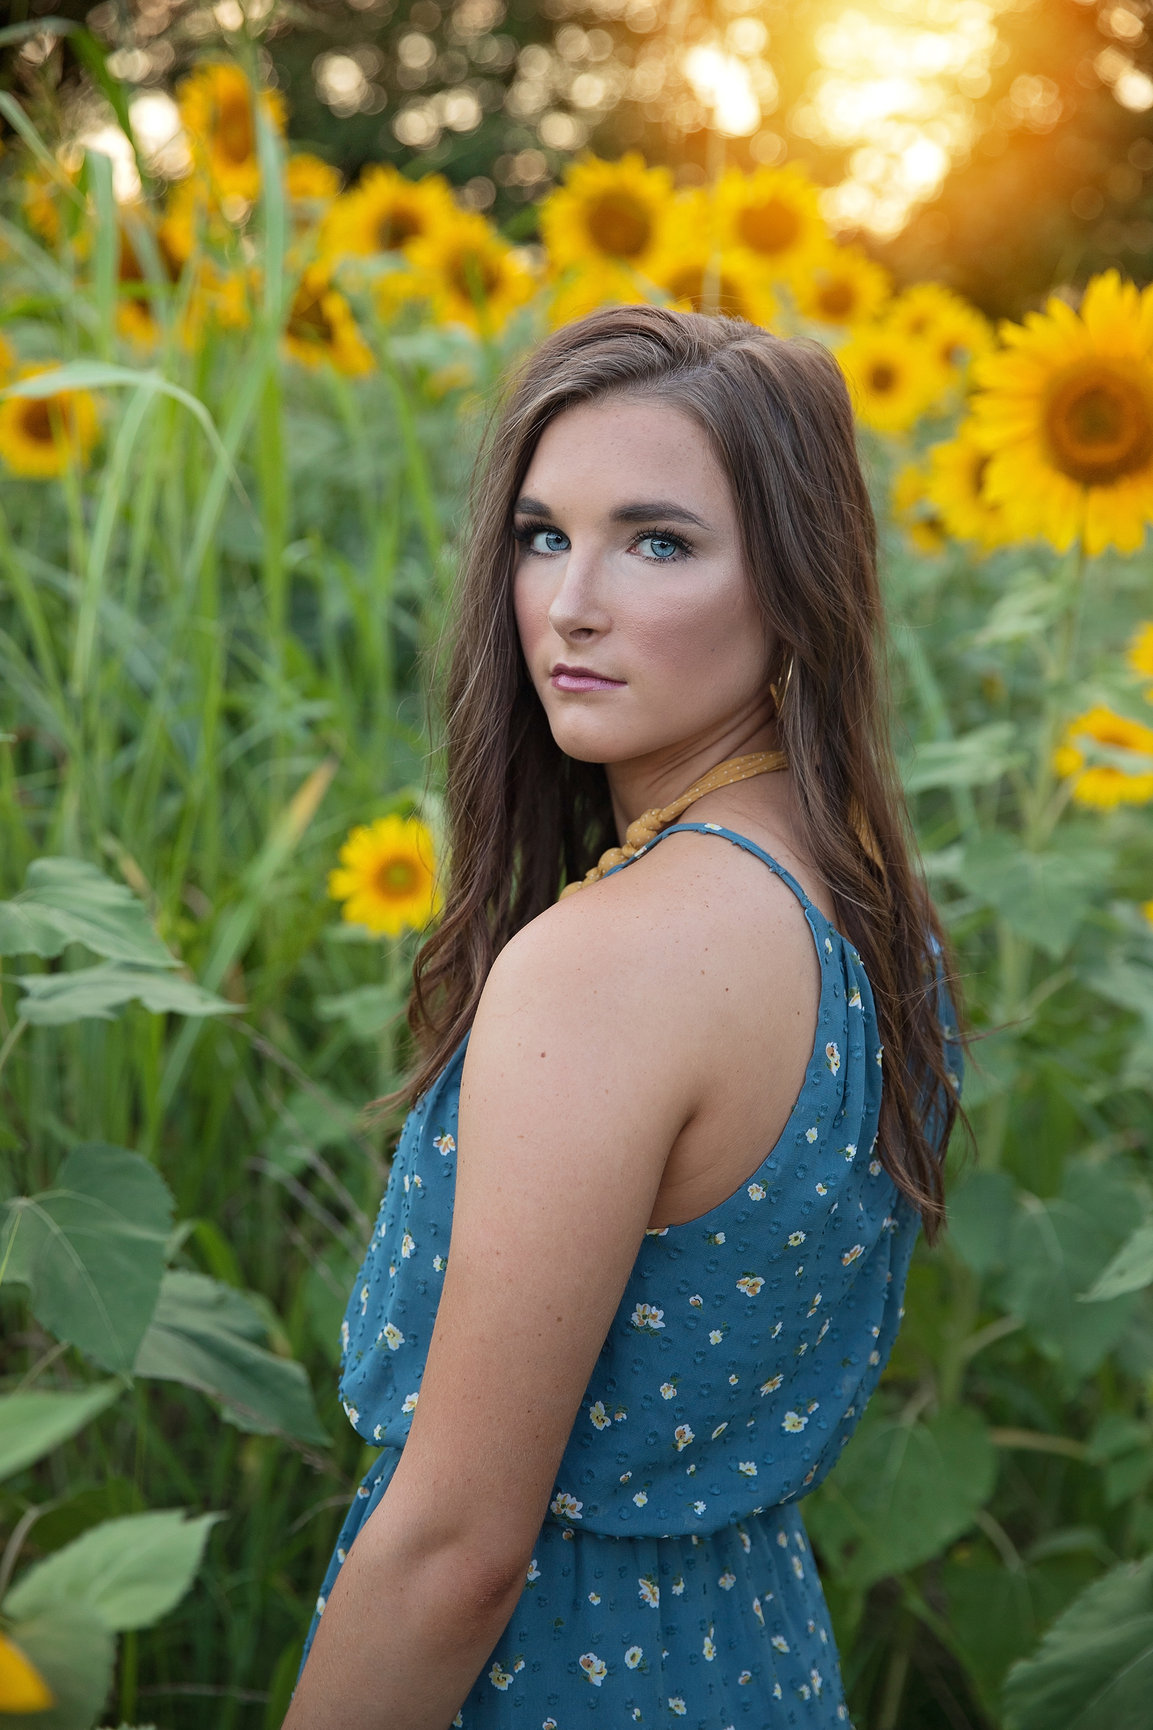 SENIOR Photo Sessions - Memories by Michele